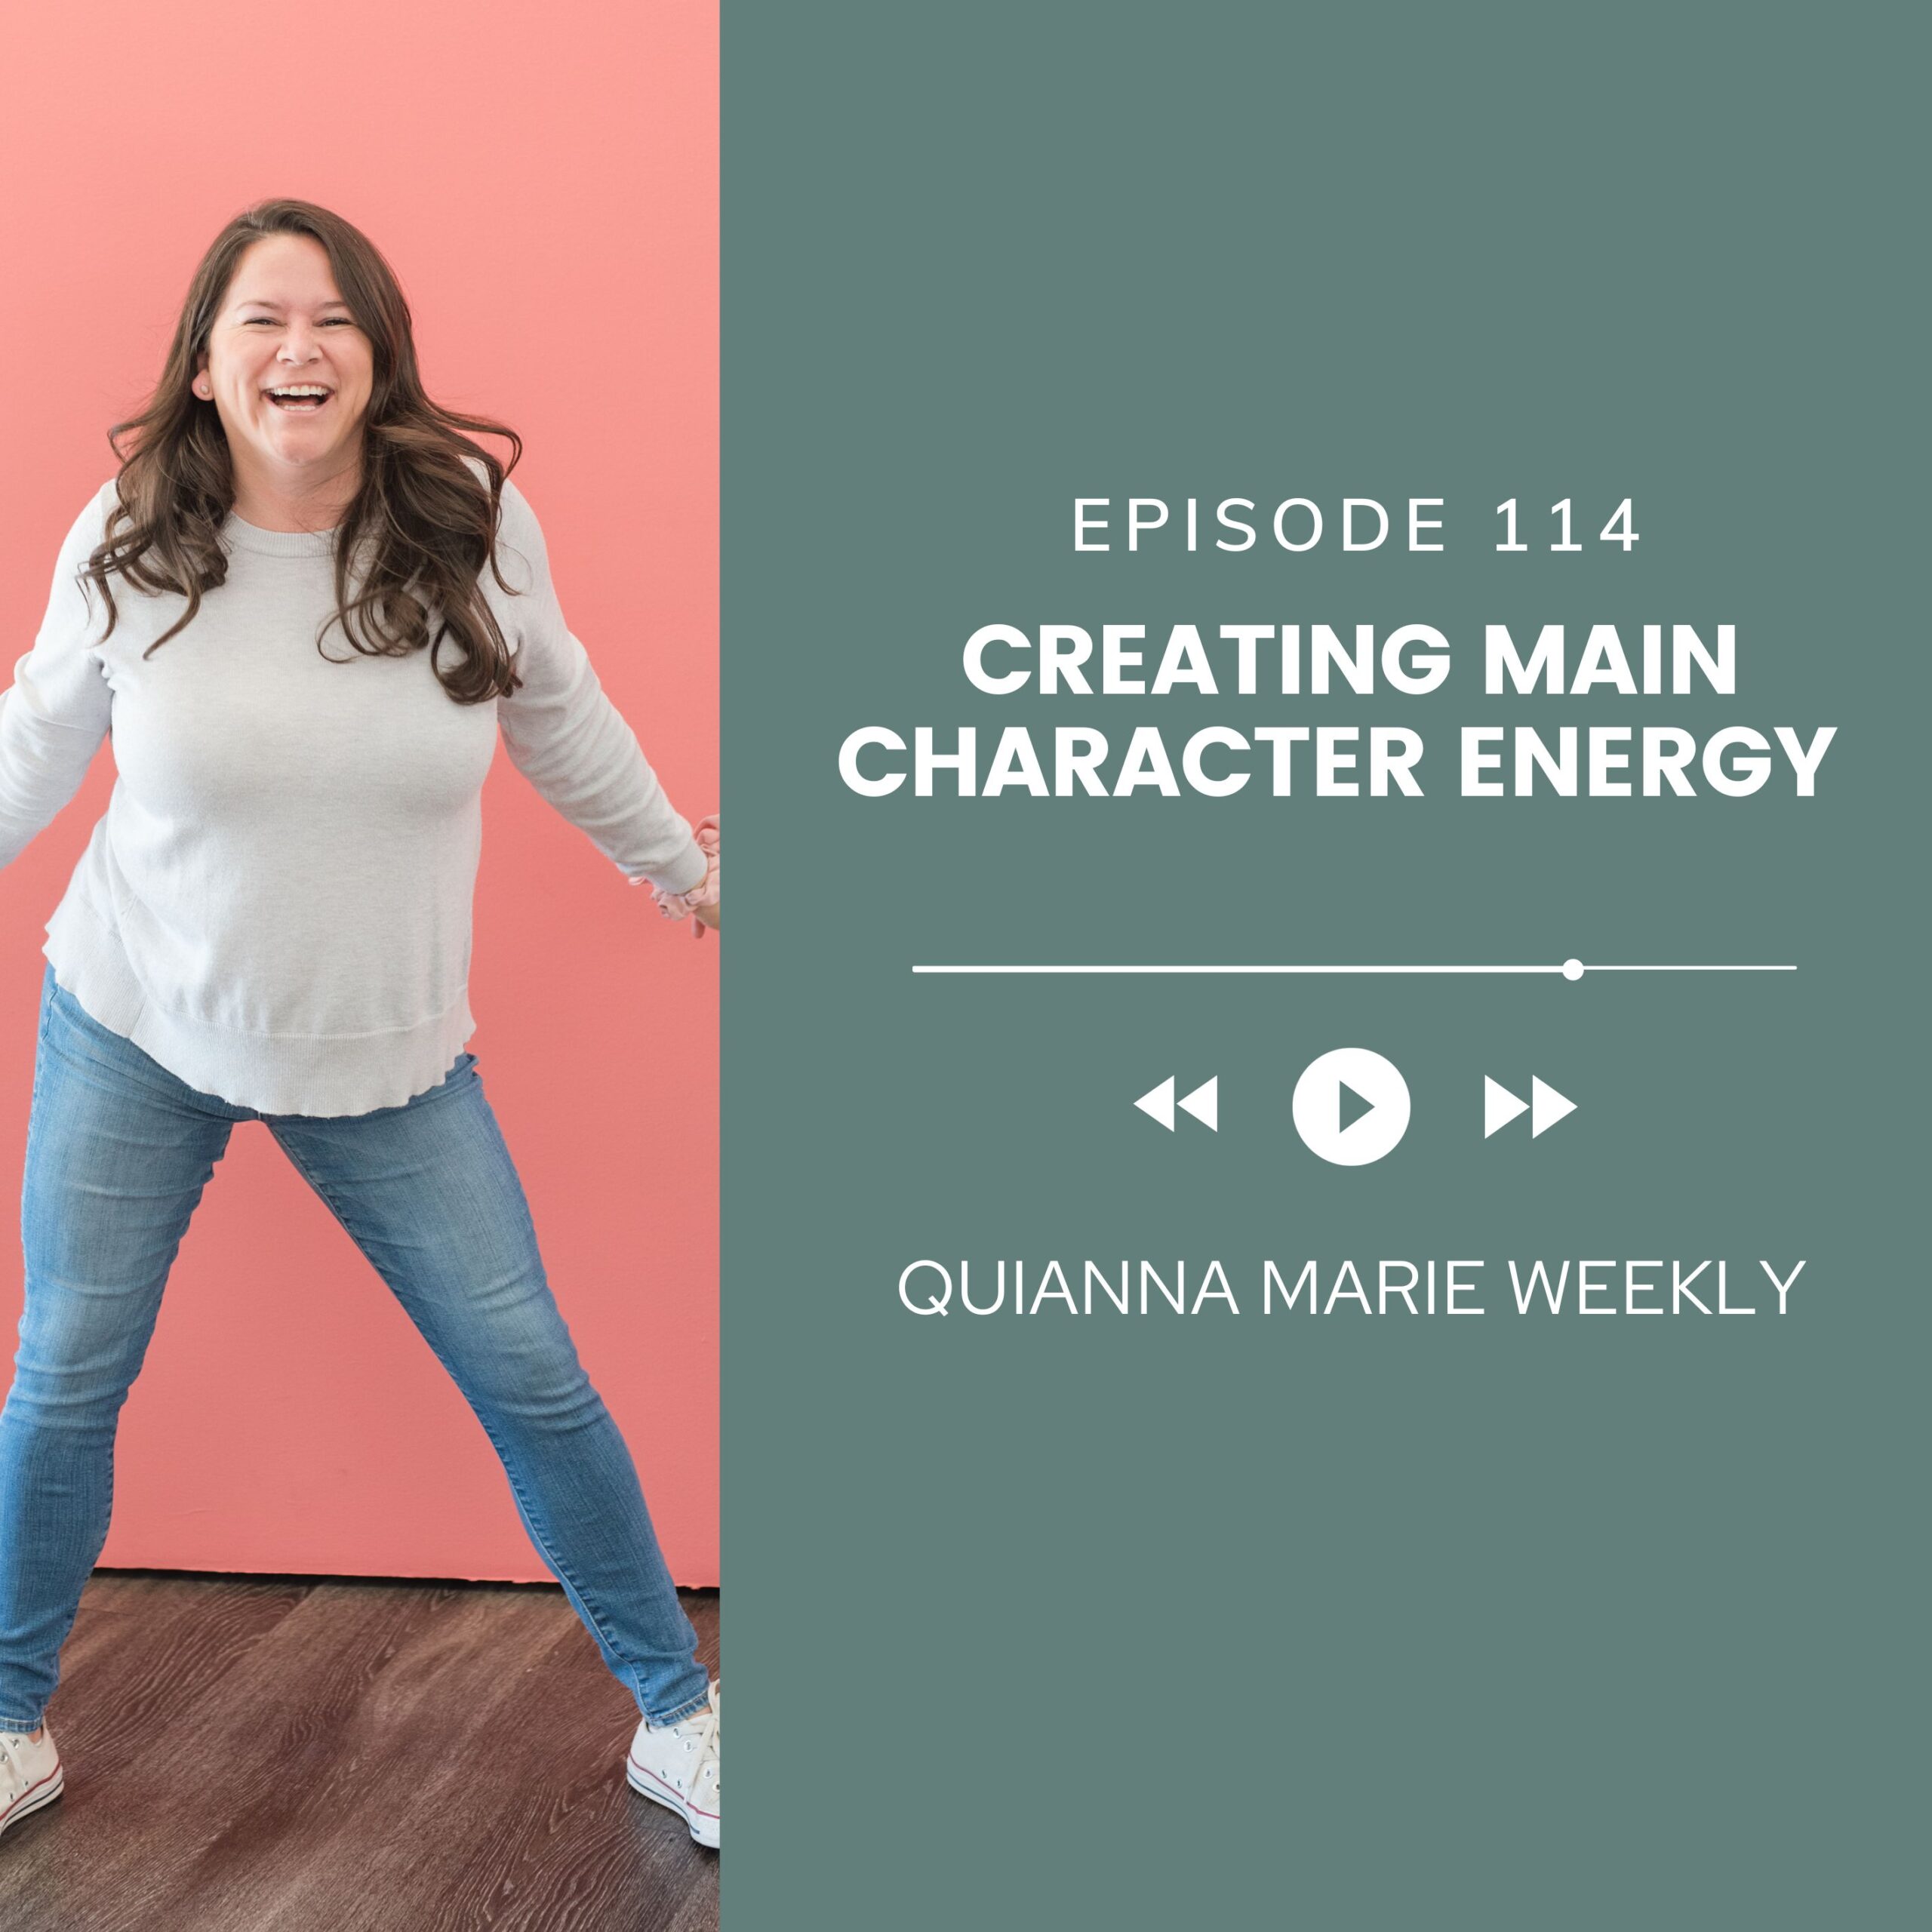 Creating Main Character Energy For Your Life and Business with Quianna Marie